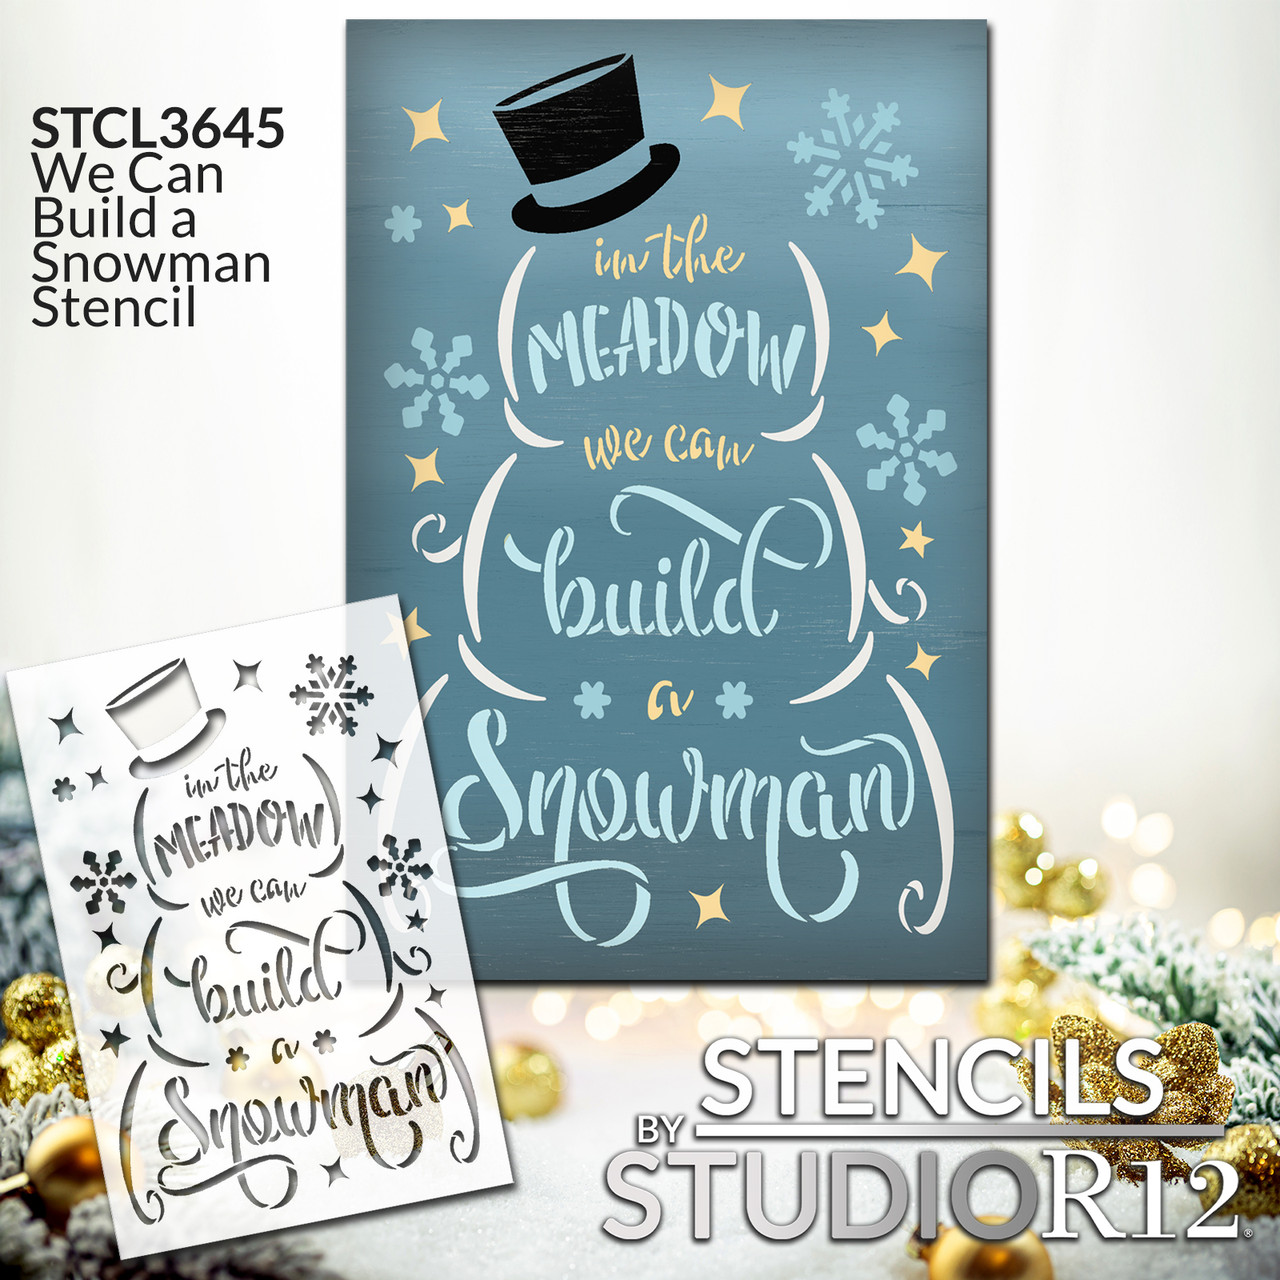 We Can Build a Snowman Stencil by StudioR12 | DIY Christmas Holiday Song Home Decor | Craft & Paint Wood Sign | Reusable Mylar Template | Winter Cursive Script Gift Select Size